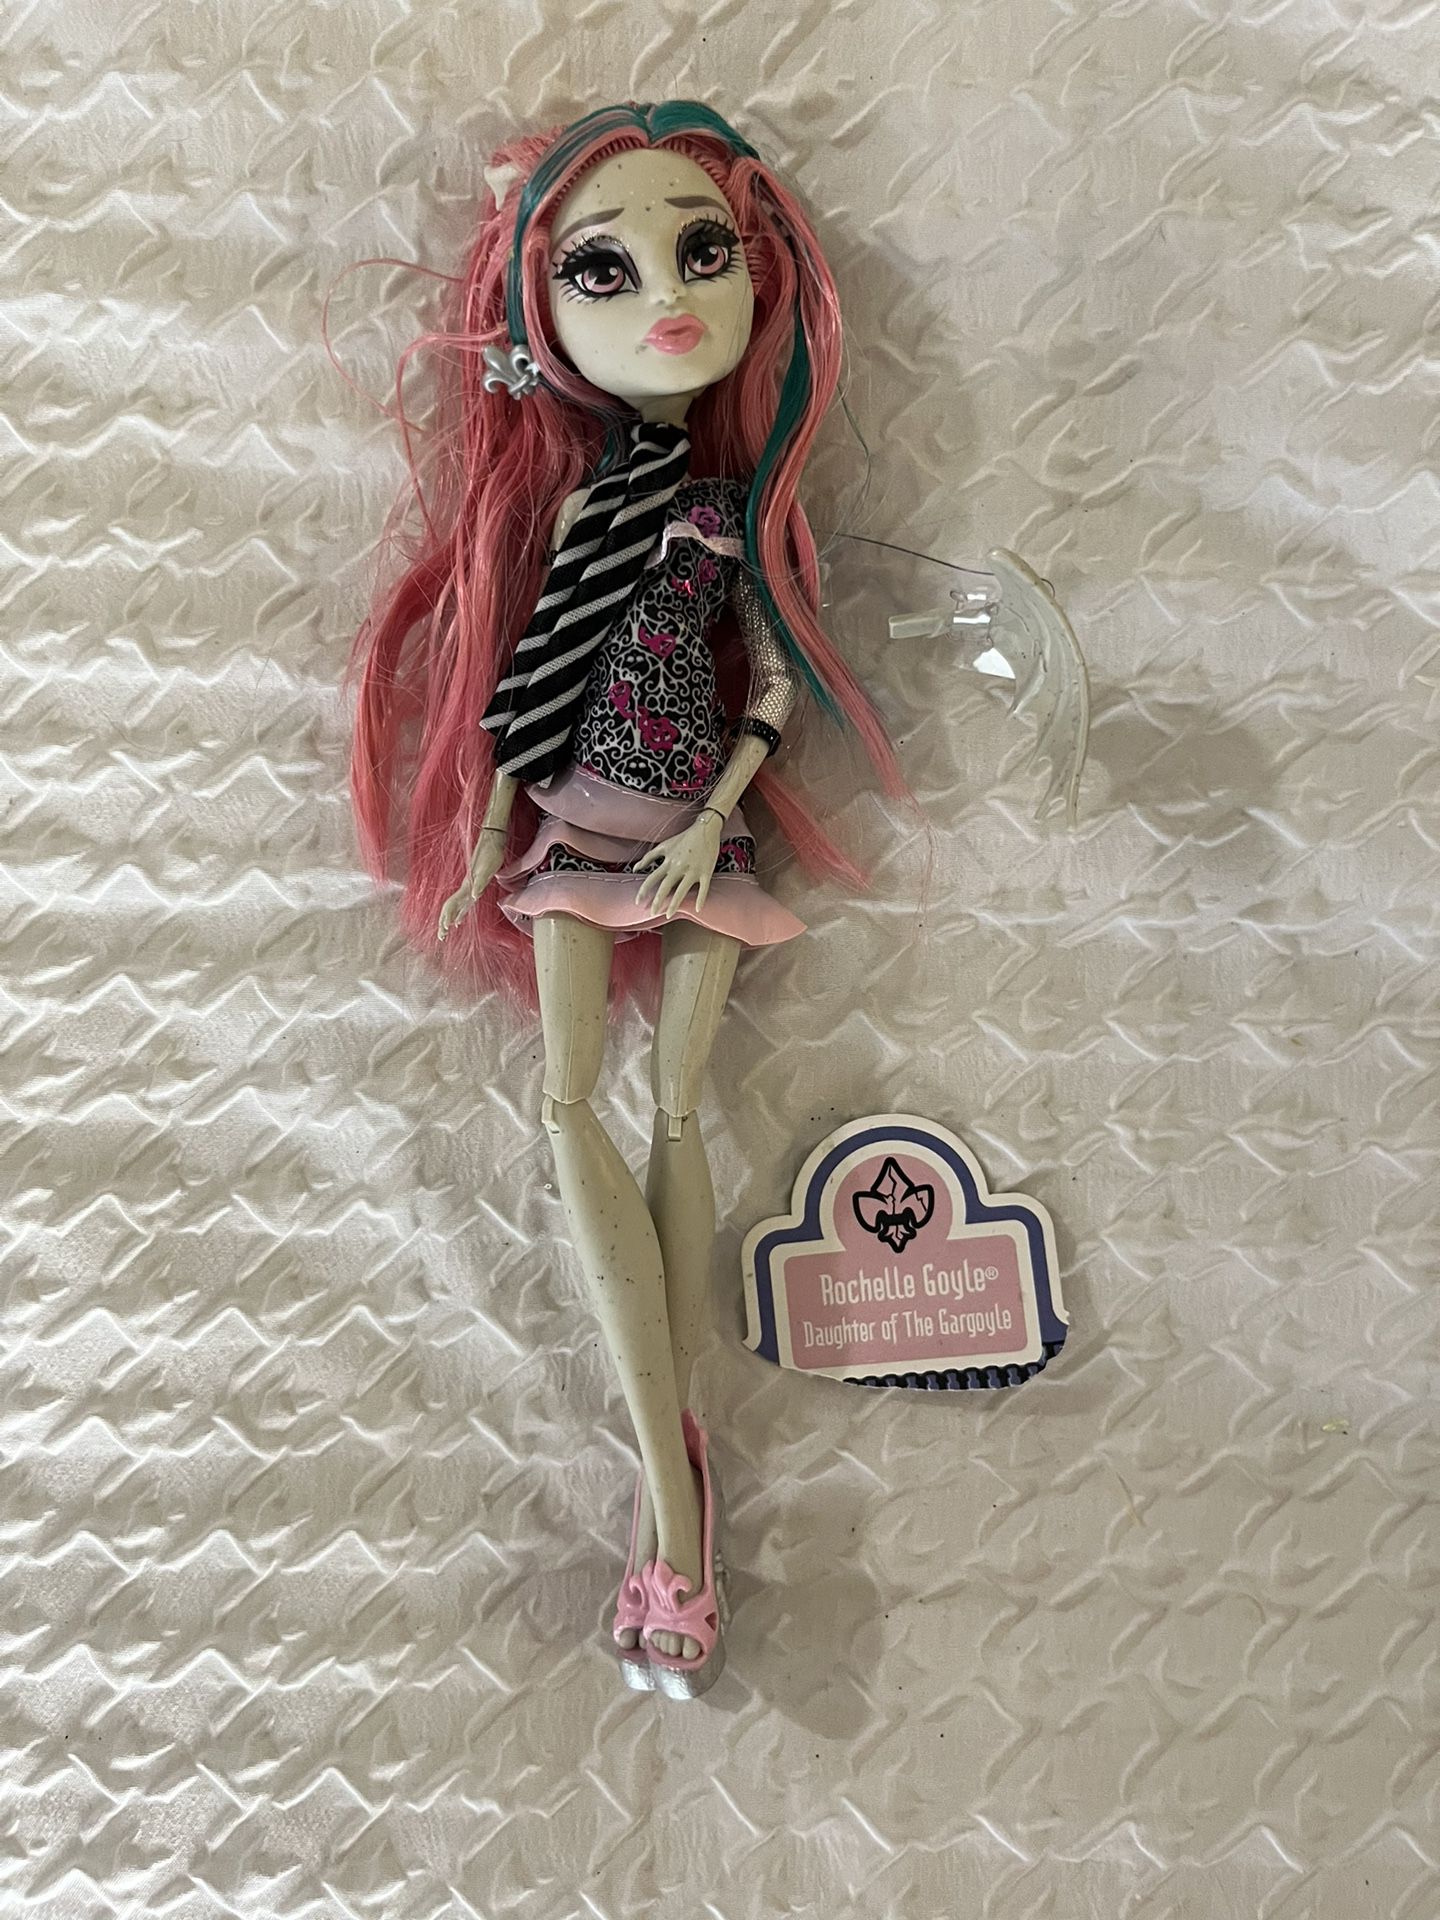 Monster High Rochelle Doyle Doll: Girls Night Out 2012